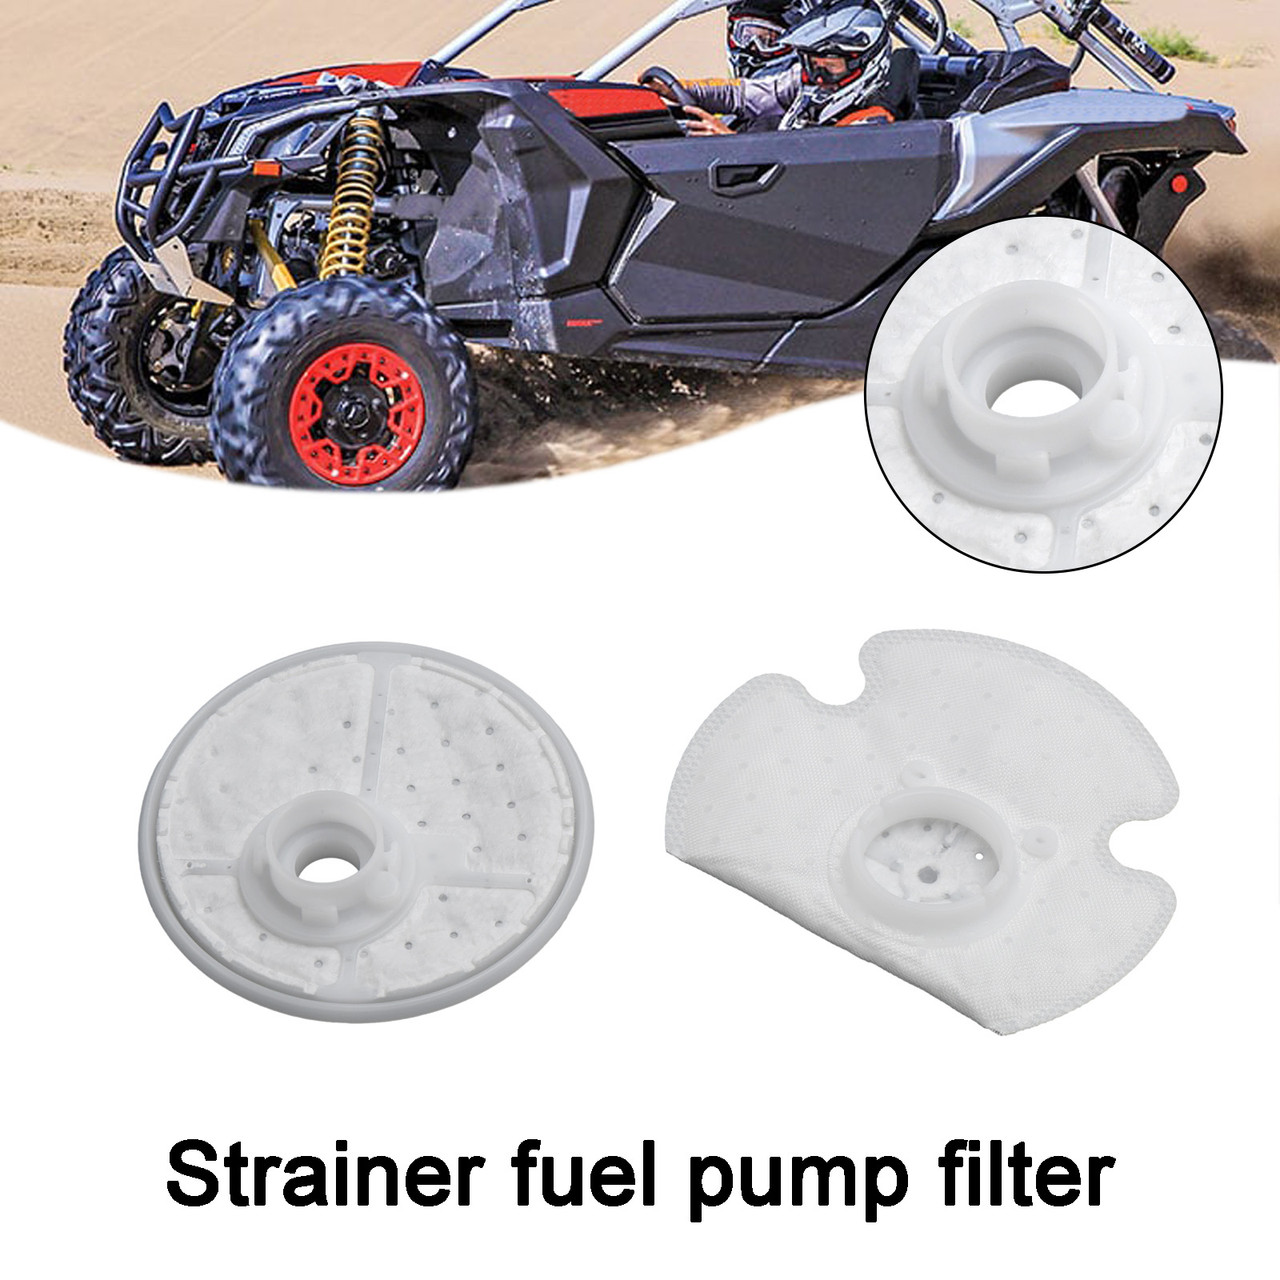 270600108 Strainer fuel pump filter 270600113 For Can-AM Maverick X3 Turbo MAX